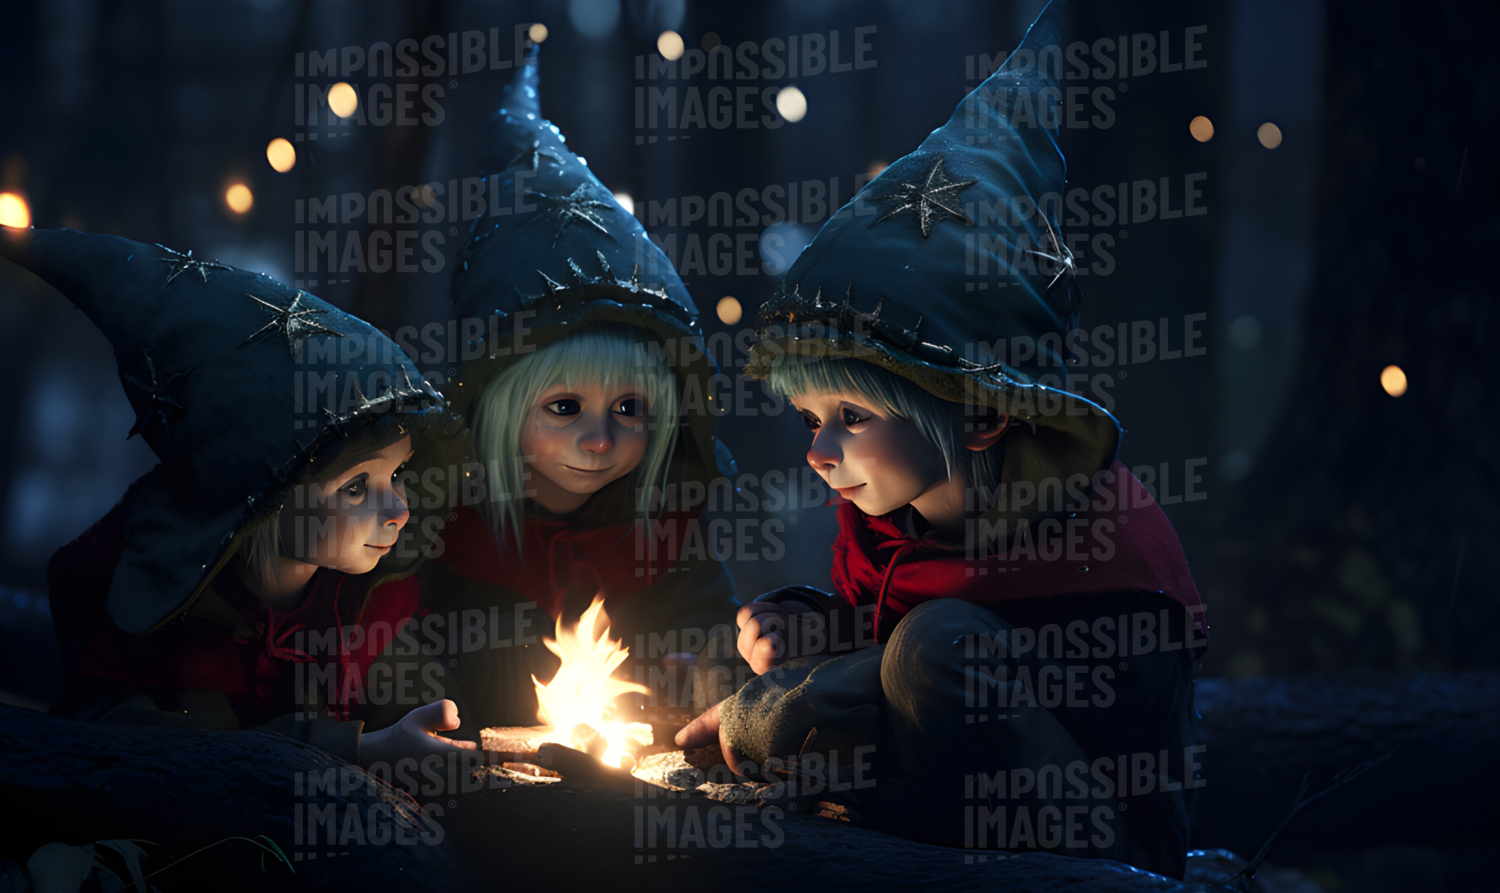 Elves huddled around a fire -  Elves huddled around a campfire, their faces illuminated by the warm, flickering light. They laughed and talked, enjoying the moment of peace and camaraderie.